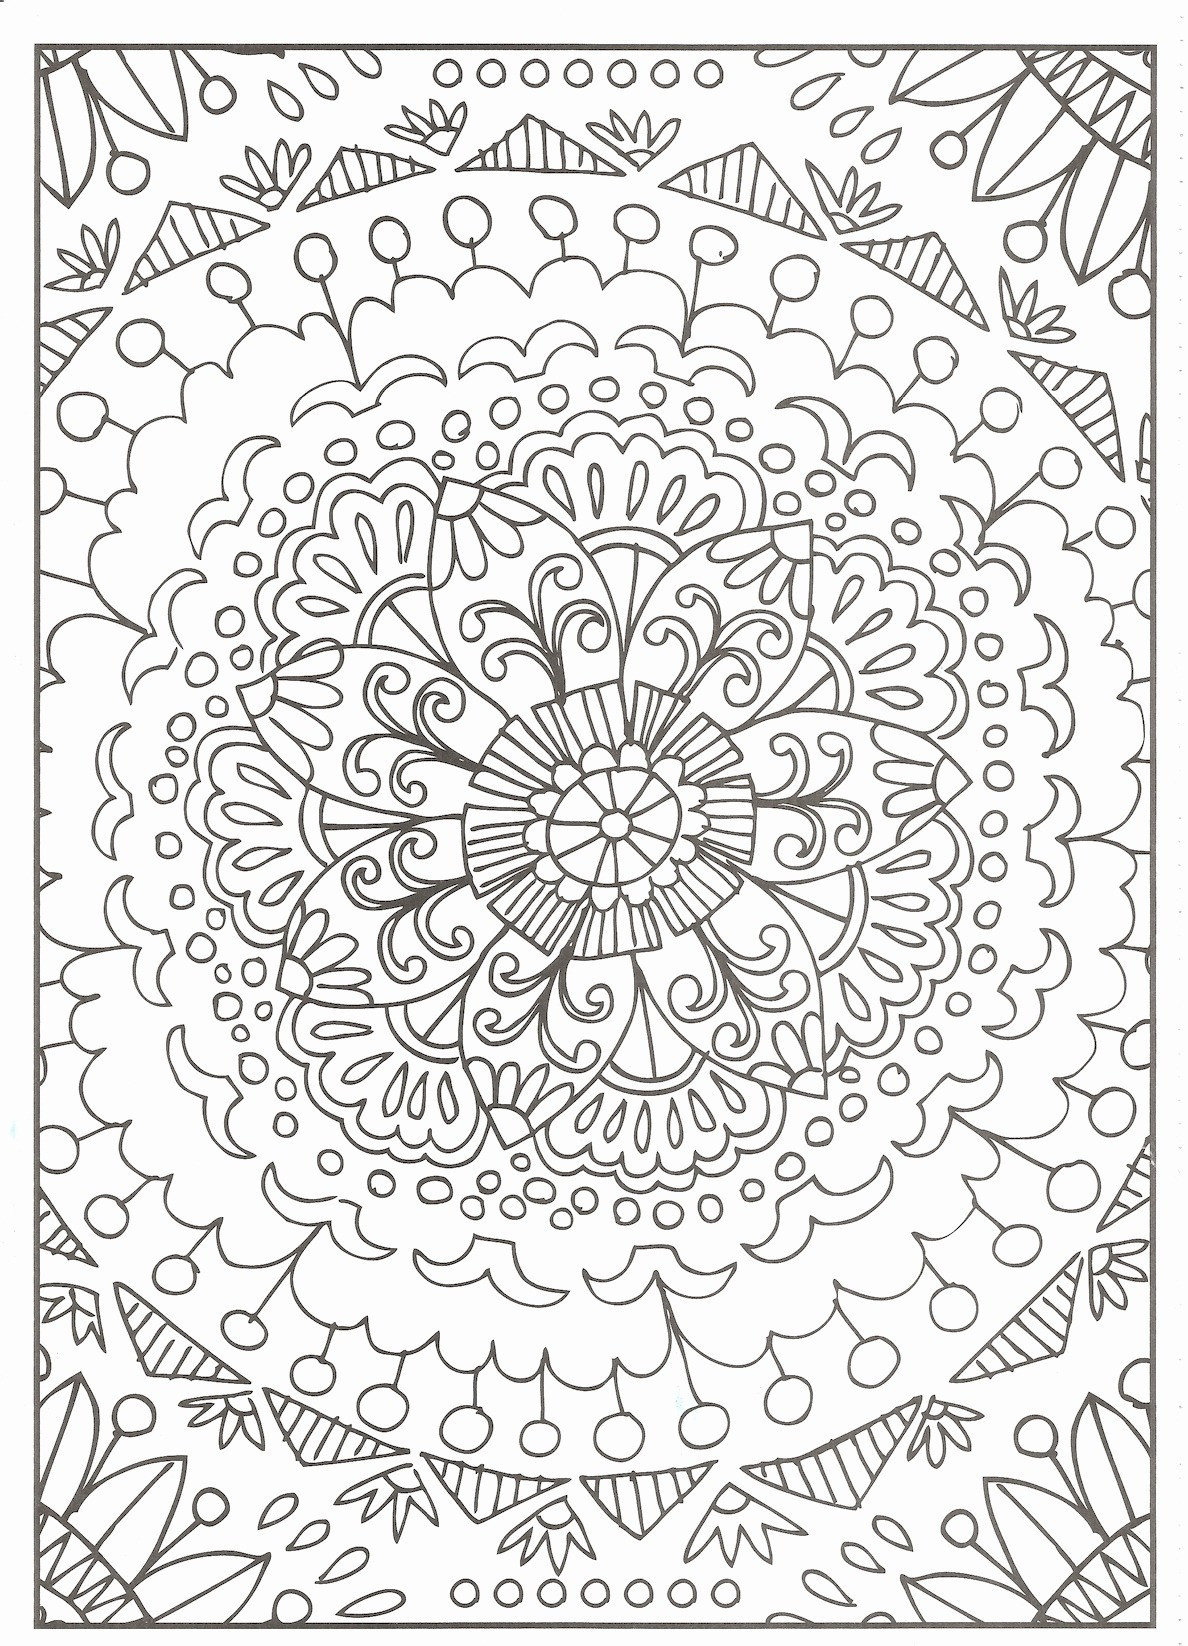 21 Lovable Peacock Feathers In Vase 2024 free download peacock feathers in vase of peacock coloring page coloring pages coloring pages with peacock coloring page free peacock coloring pages unique print out coloring pages